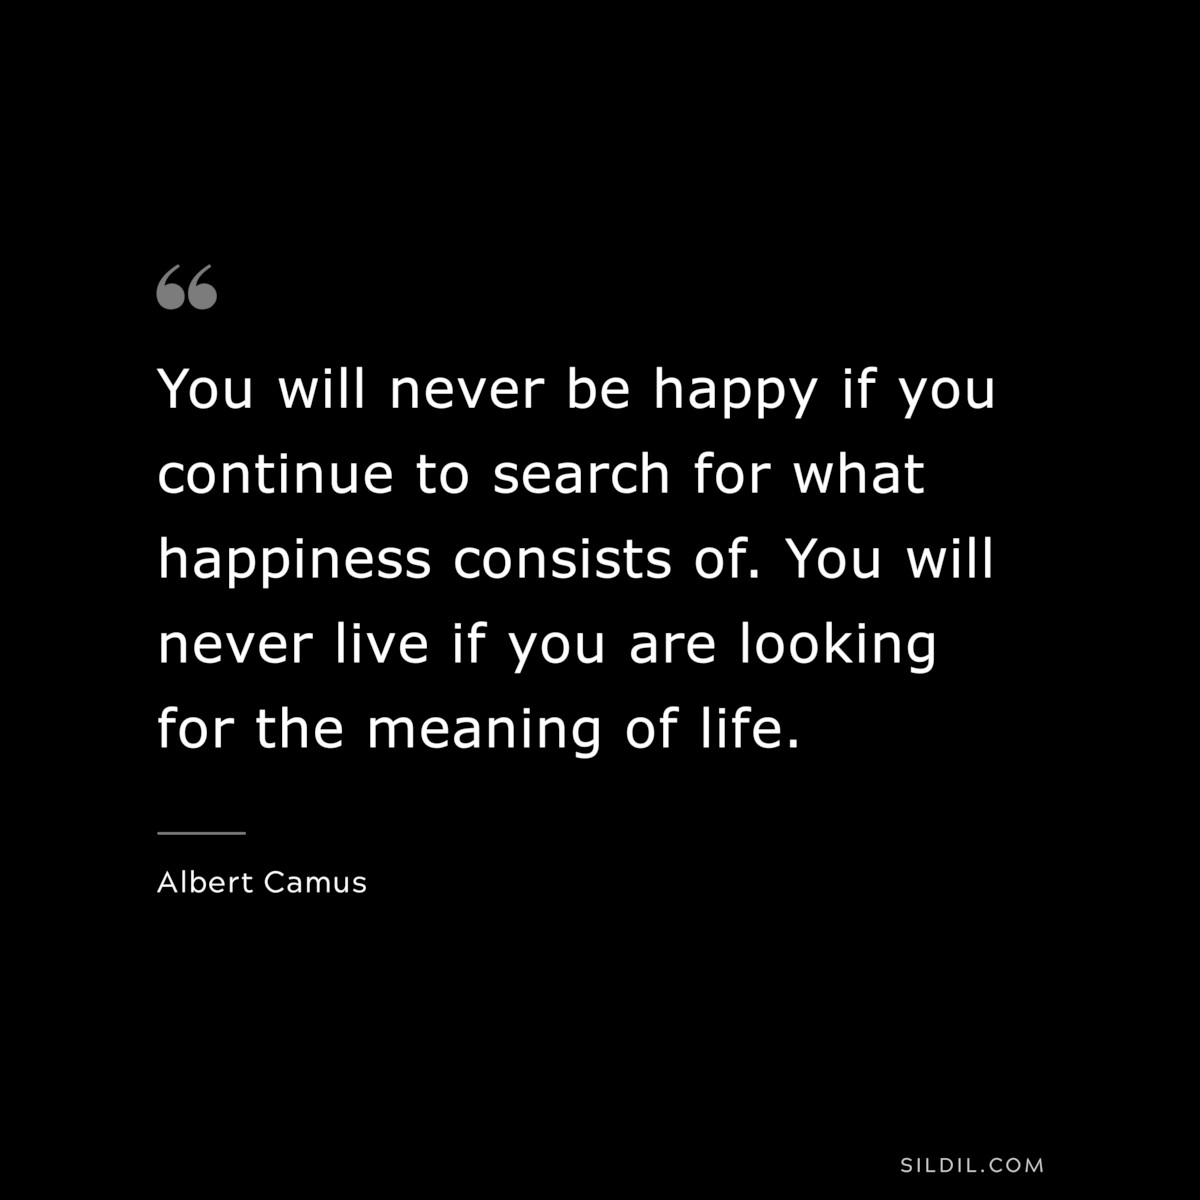 You will never be happy if you continue to search for what happiness consists of. You will never live if you are looking for the meaning of life. ― Albert Camus